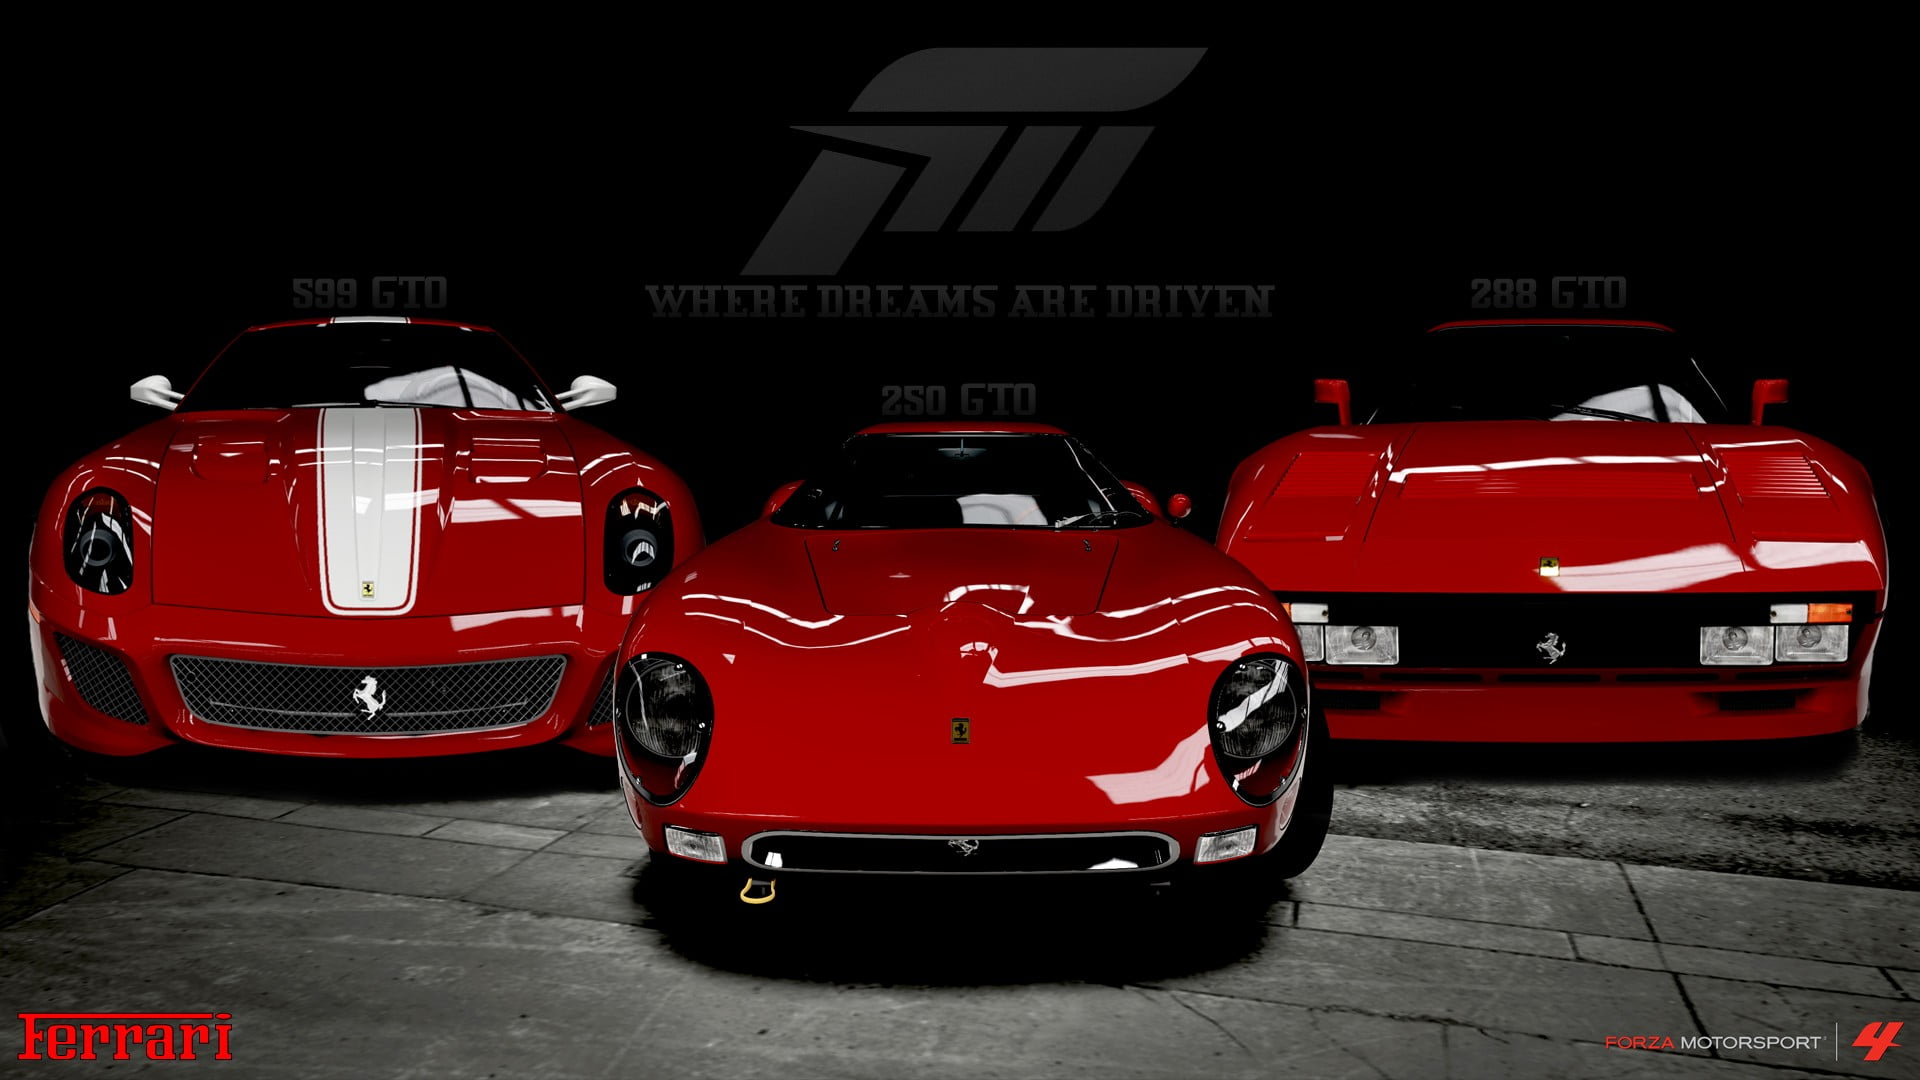 three red luxury cars, red cars, Ferrari, vehicle, mode of transportation